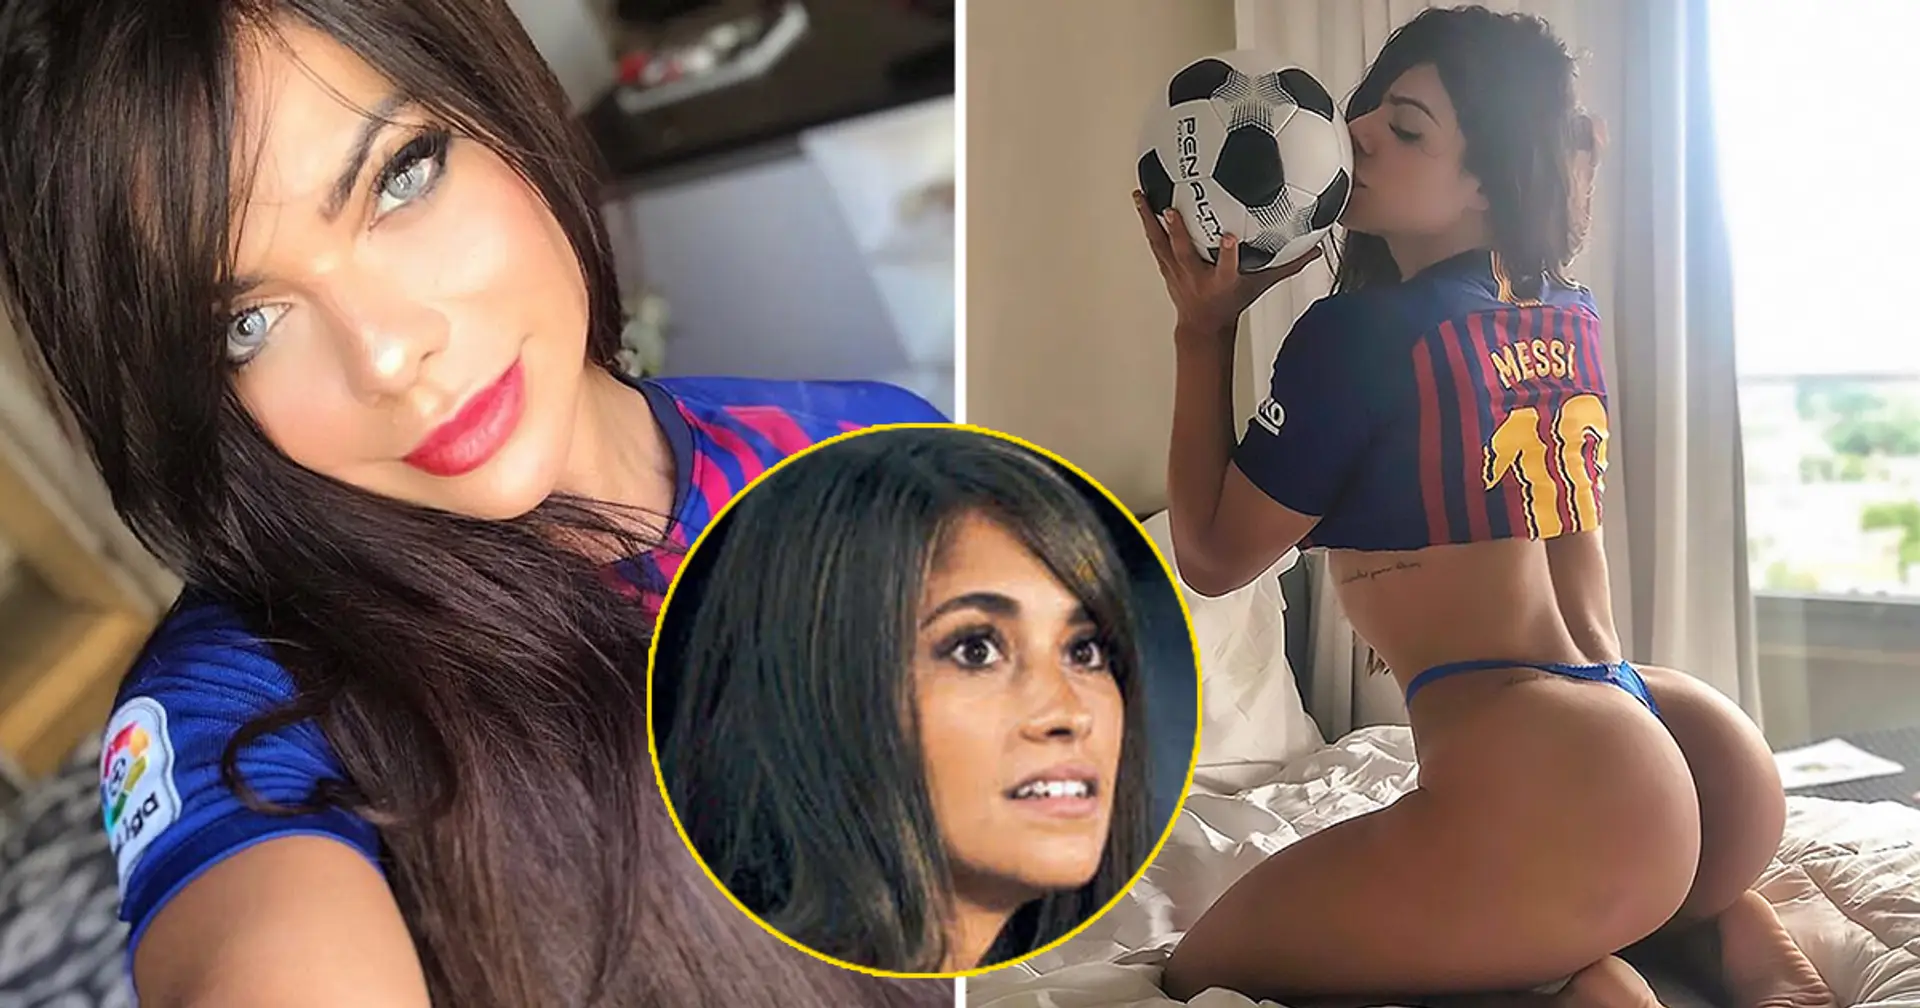 Who is Miss BumBum and why was she blocked on Instagram by Messi's wife? You asked – we answered